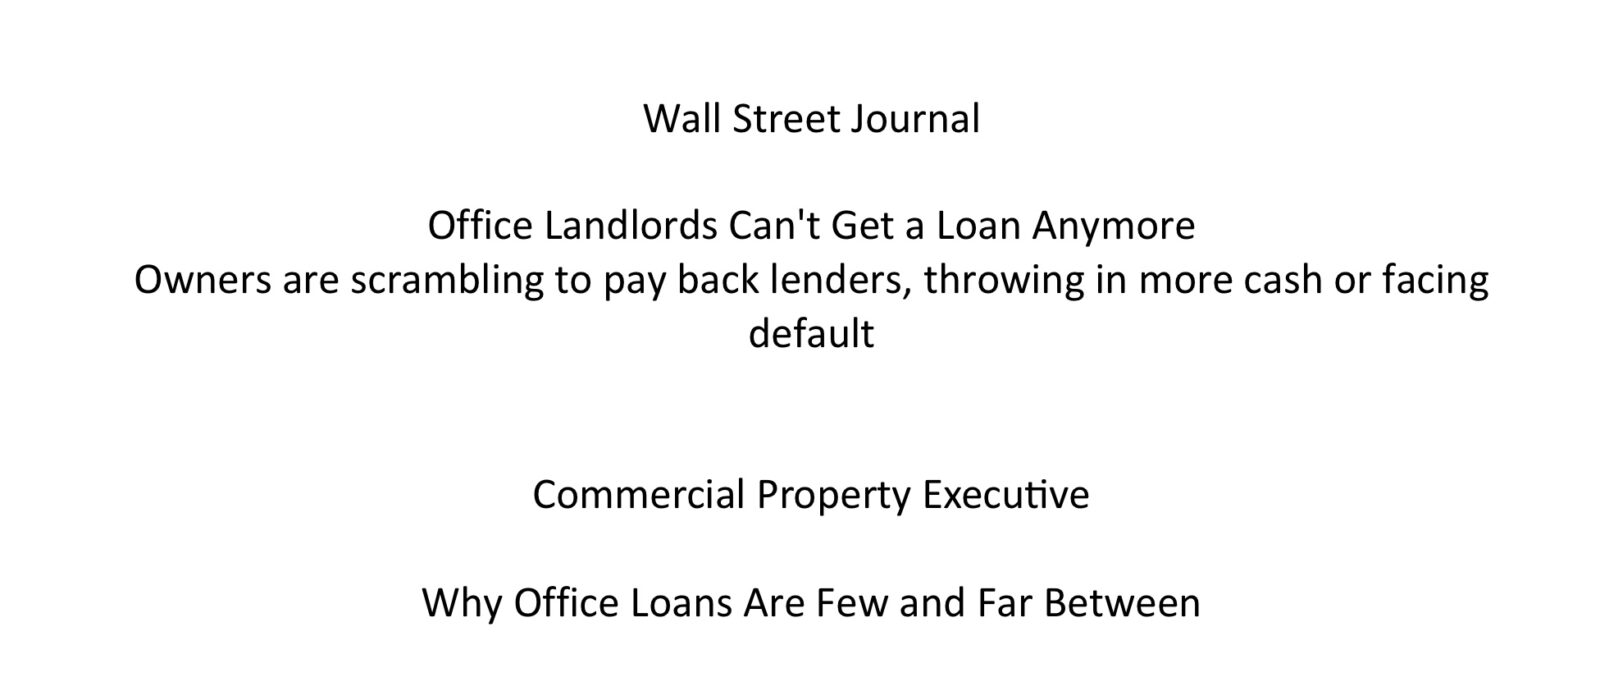 Lenders are not interested in investing in office space